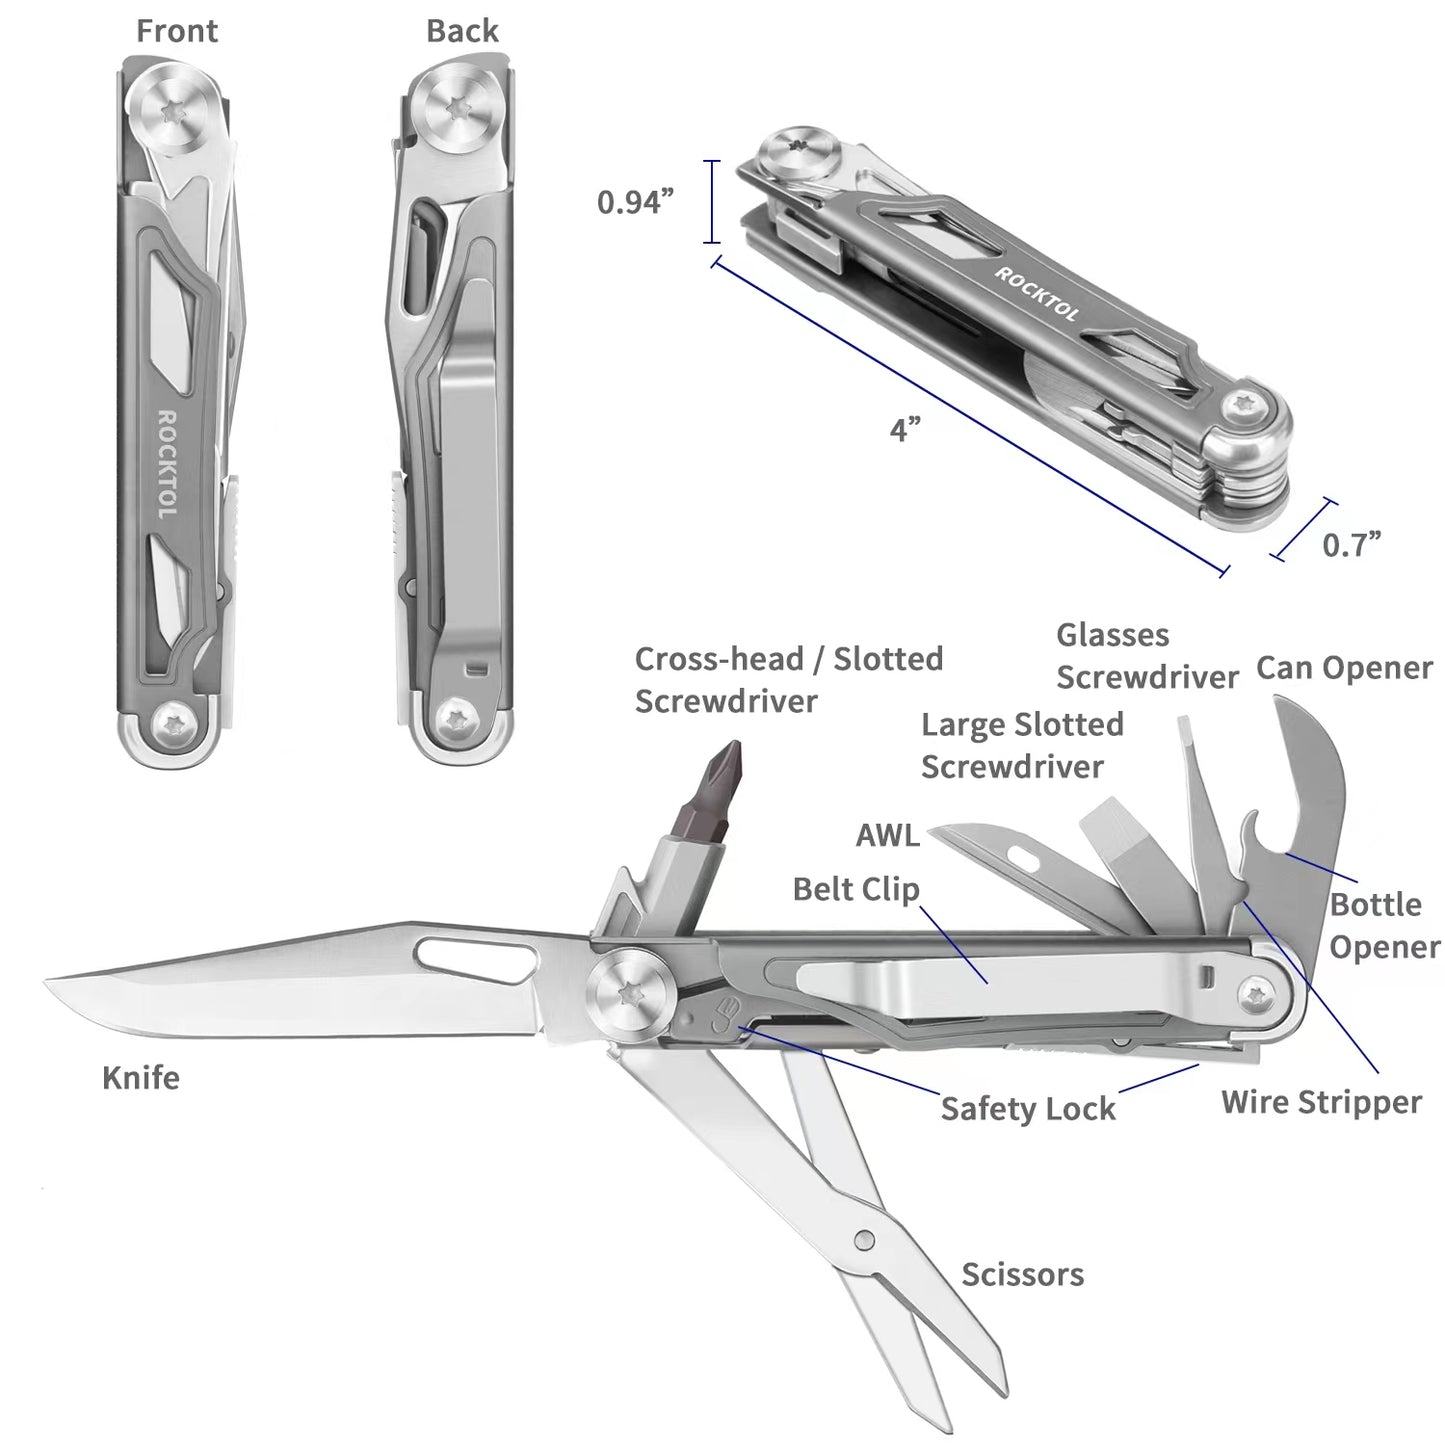 ROCKTOL Folding Pocket Knife, 12-in-1 Stainless Steel Multitool Knife with Titanium-Plated Handle, Pocket Clip for Camping, Hiking, Survival